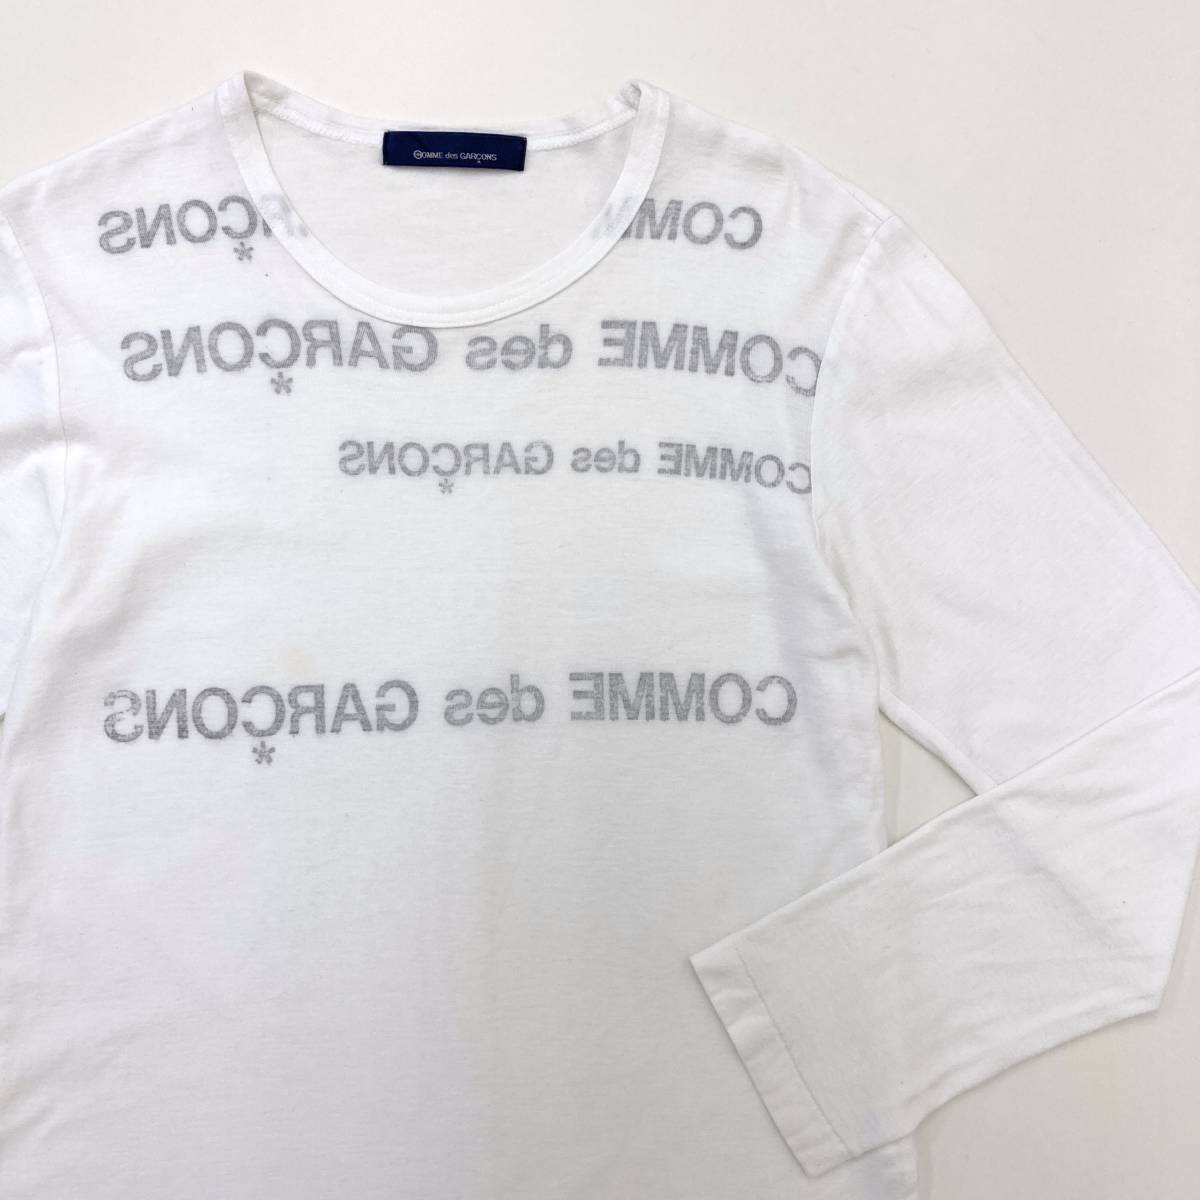 AD1995 青山 COMME des GARCONS 反転 ロゴ インサイドアウト 長袖 カットソー コムデギャルソン Tシャツ 90s VINTAGE archive 3060384